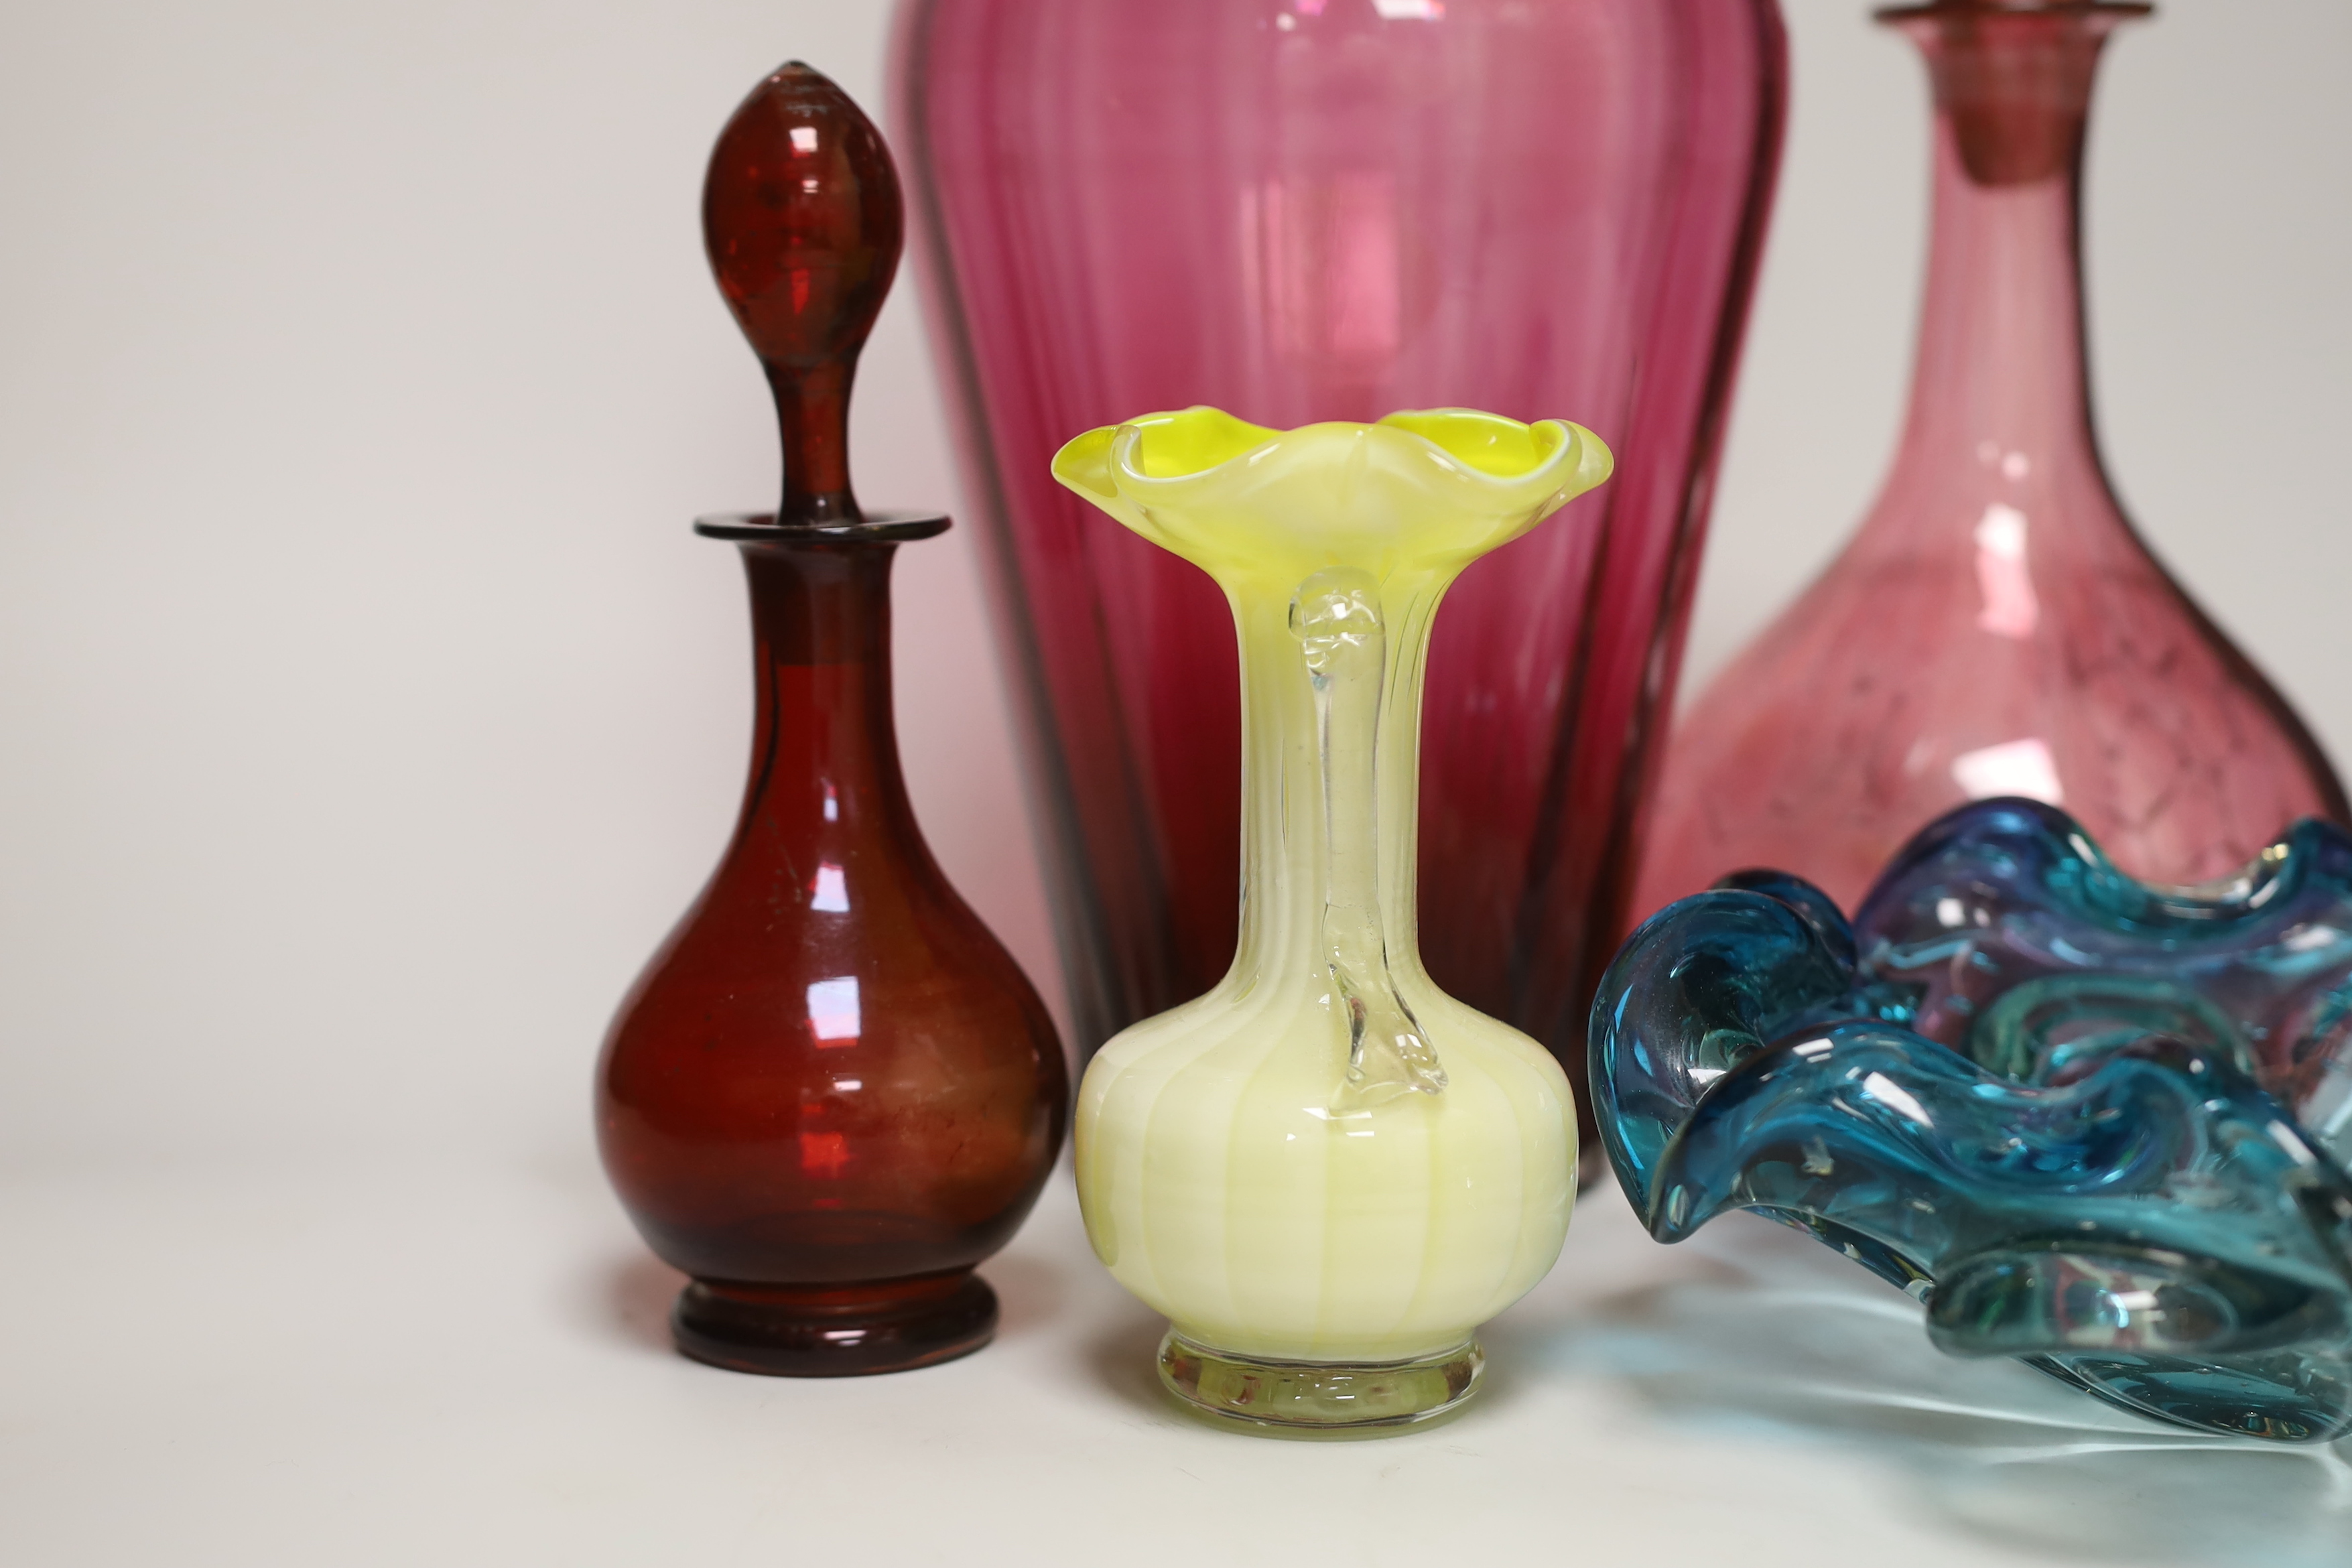 A cranberry vase, decanter and mixed glassware, tallest 34cm